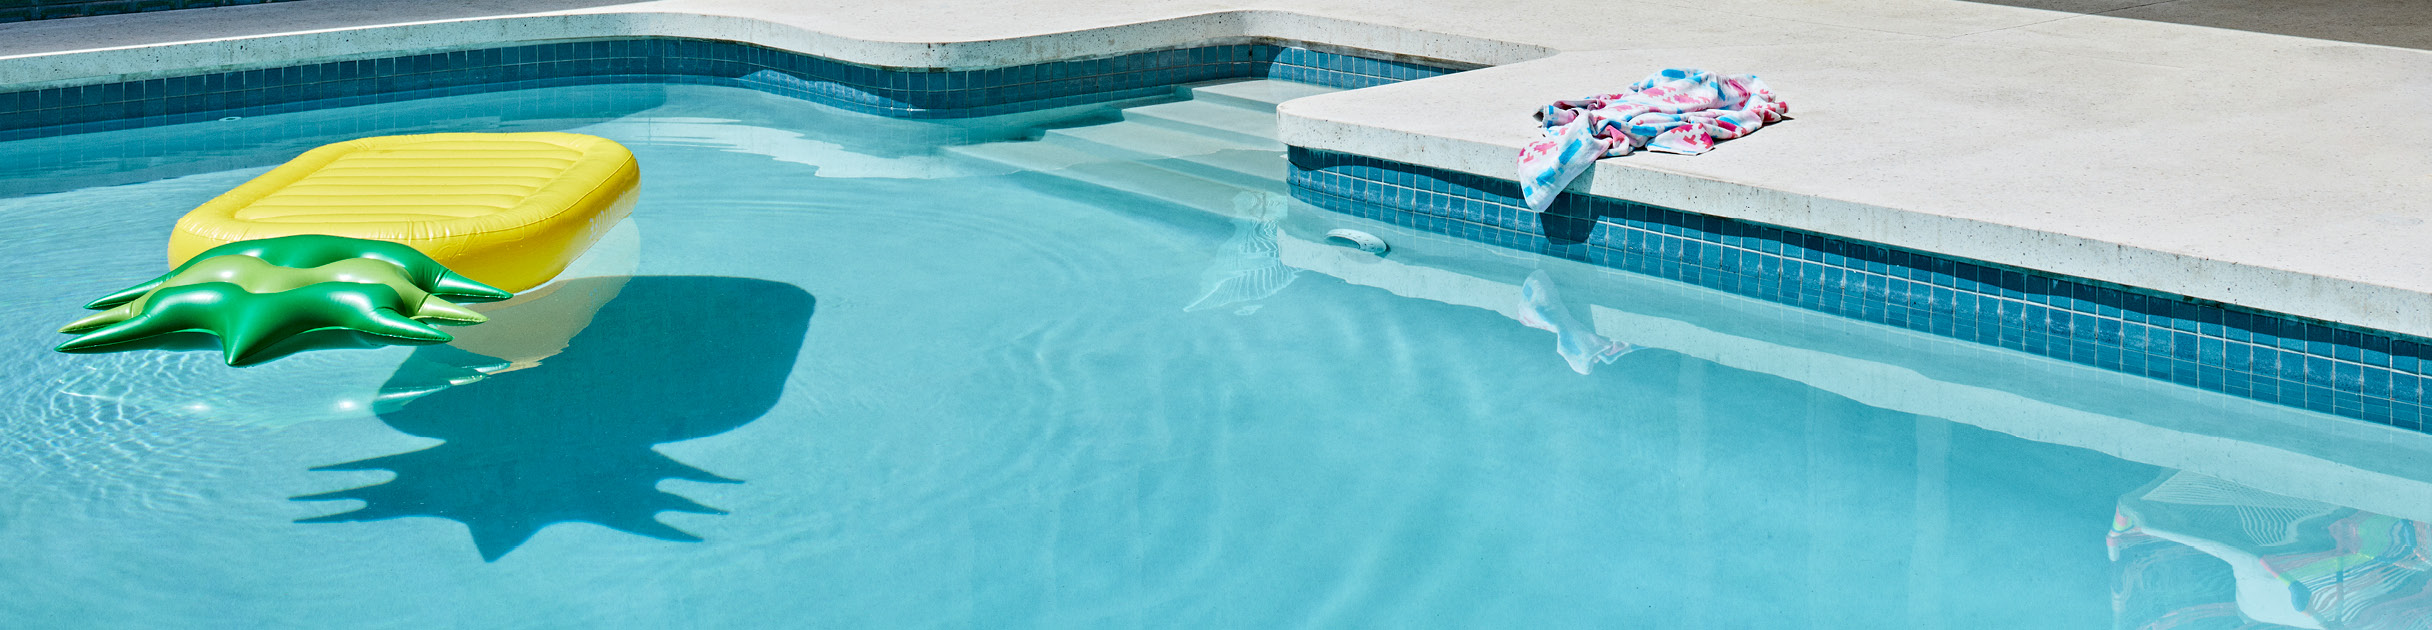 <p><span xml:lang="EN-AU" data-contrast="auto">There&rsquo;s nothing better than spending summer days by the pool &ndash; and we&rsquo;ve got everything you need to keep yours in top shape. Our in-store experts are ready to arm you with the best products and advice to keep your pool ready to swim in all year round.</span><span data-ccp-props="{&quot;201341983&quot;:0,&quot;335551550&quot;:1,&quot;335551620&quot;:1,&quot;335559739&quot;:160,&quot;335559740&quot;:259}">&nbsp;</span></p>